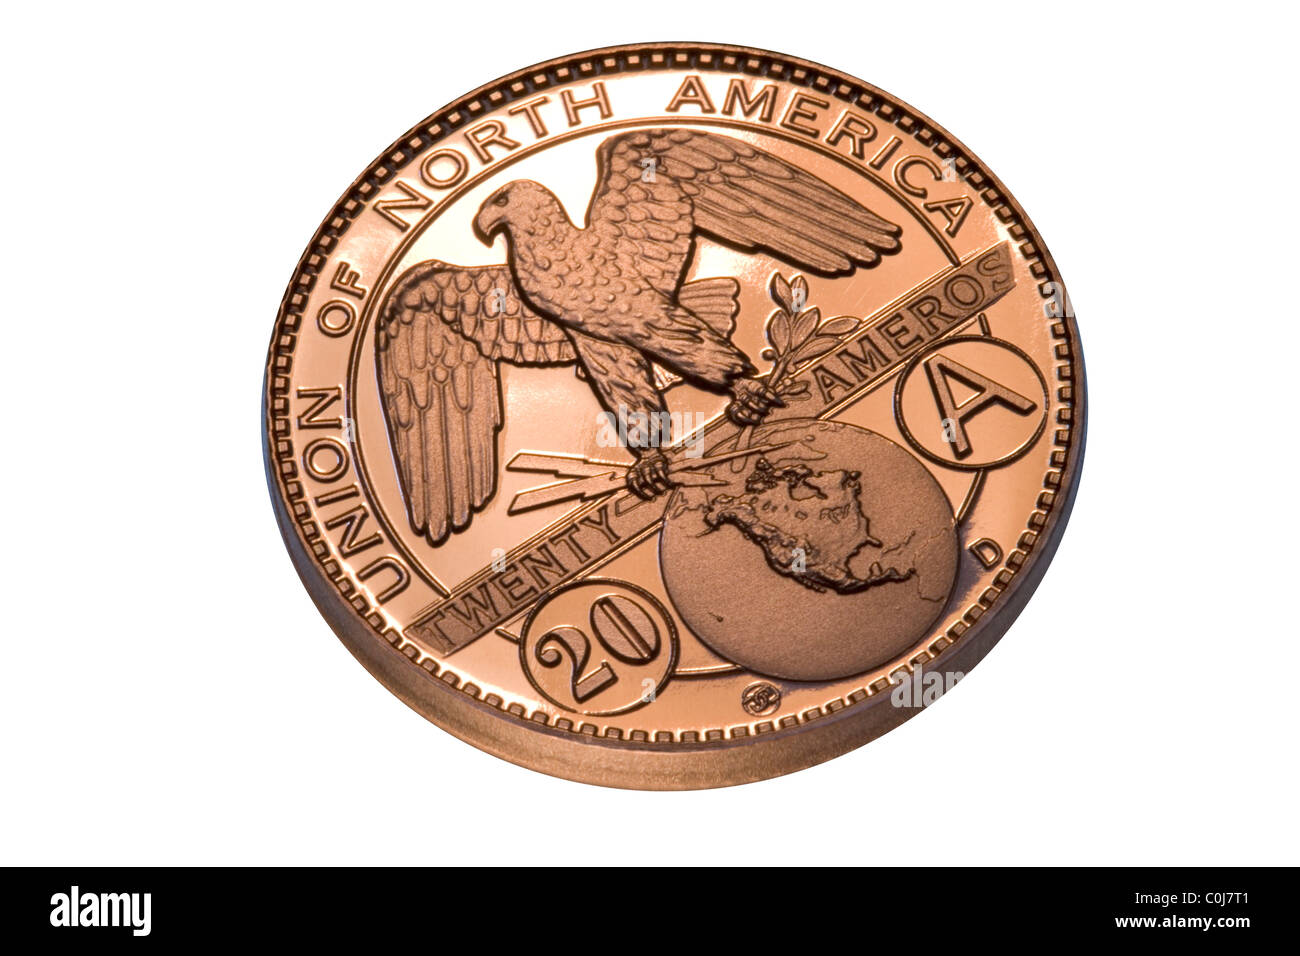 A fantasy 20 Amero coin. Some have speculated that America, Mexico, and Canada will merge into The North American Union. Stock Photo